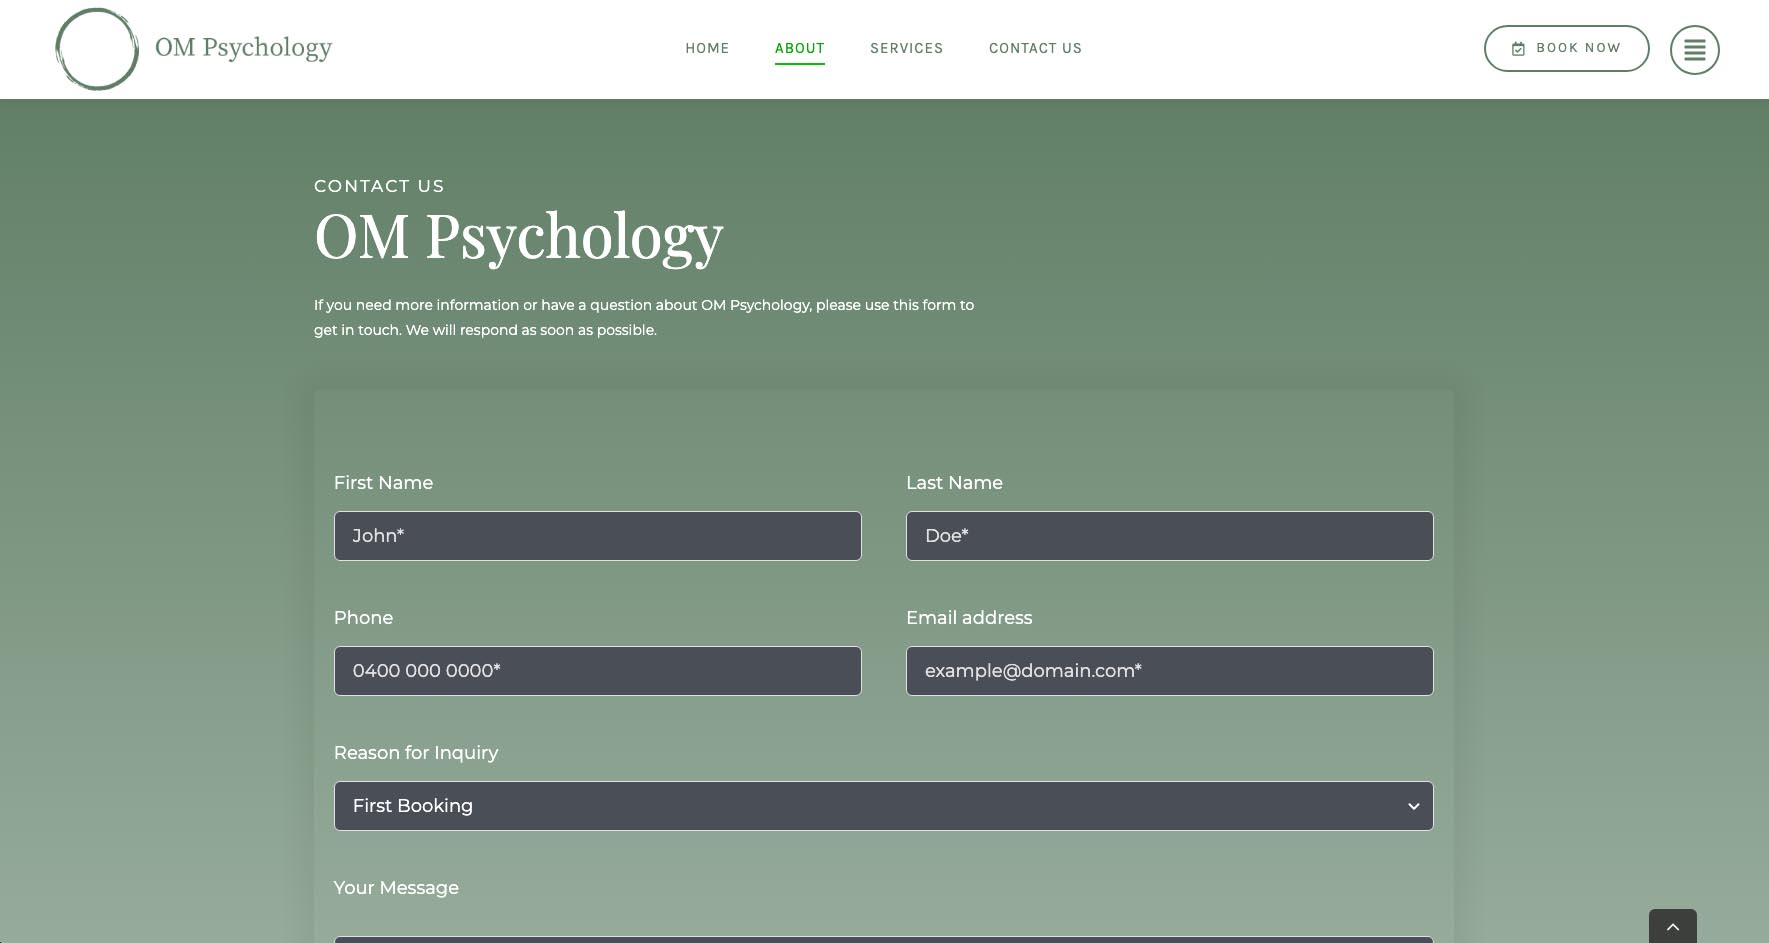 OM Psychology contact